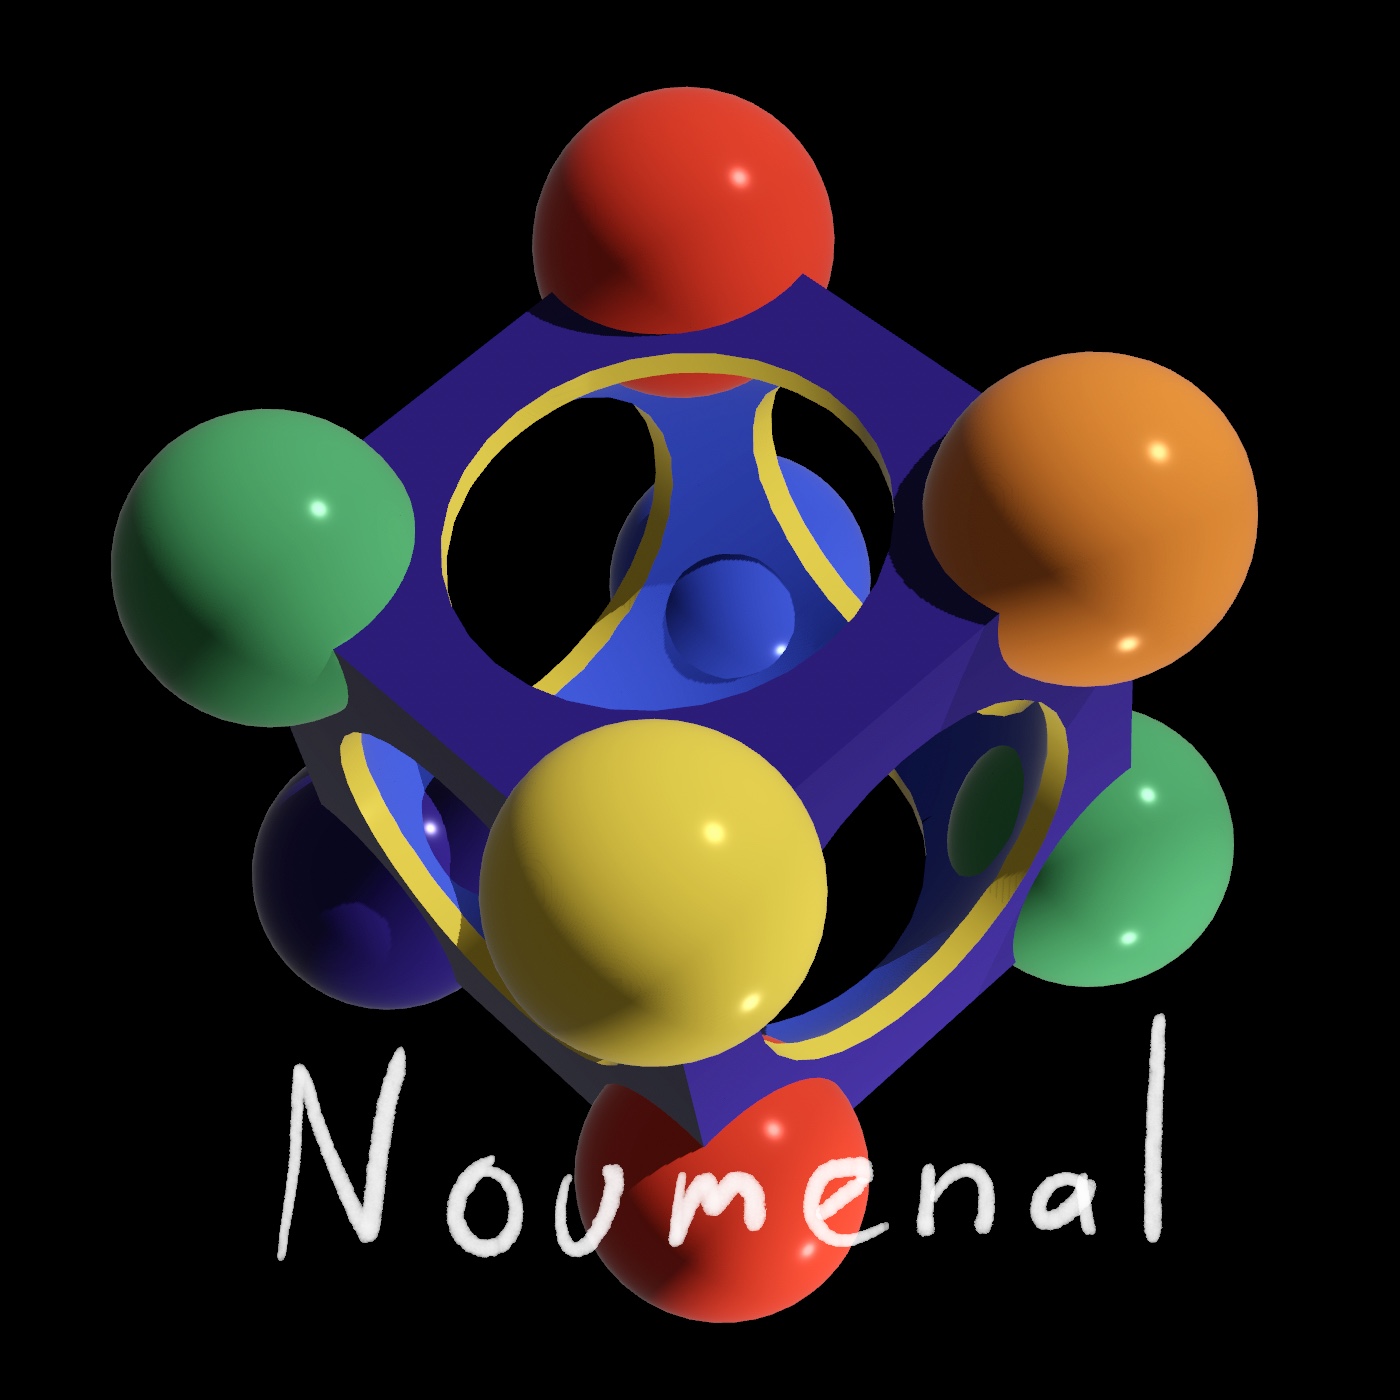 The logo for Noumenal, a colorful cube with spheres on each corner and a spherical hole in the center, and "Noumenal" written underneath.